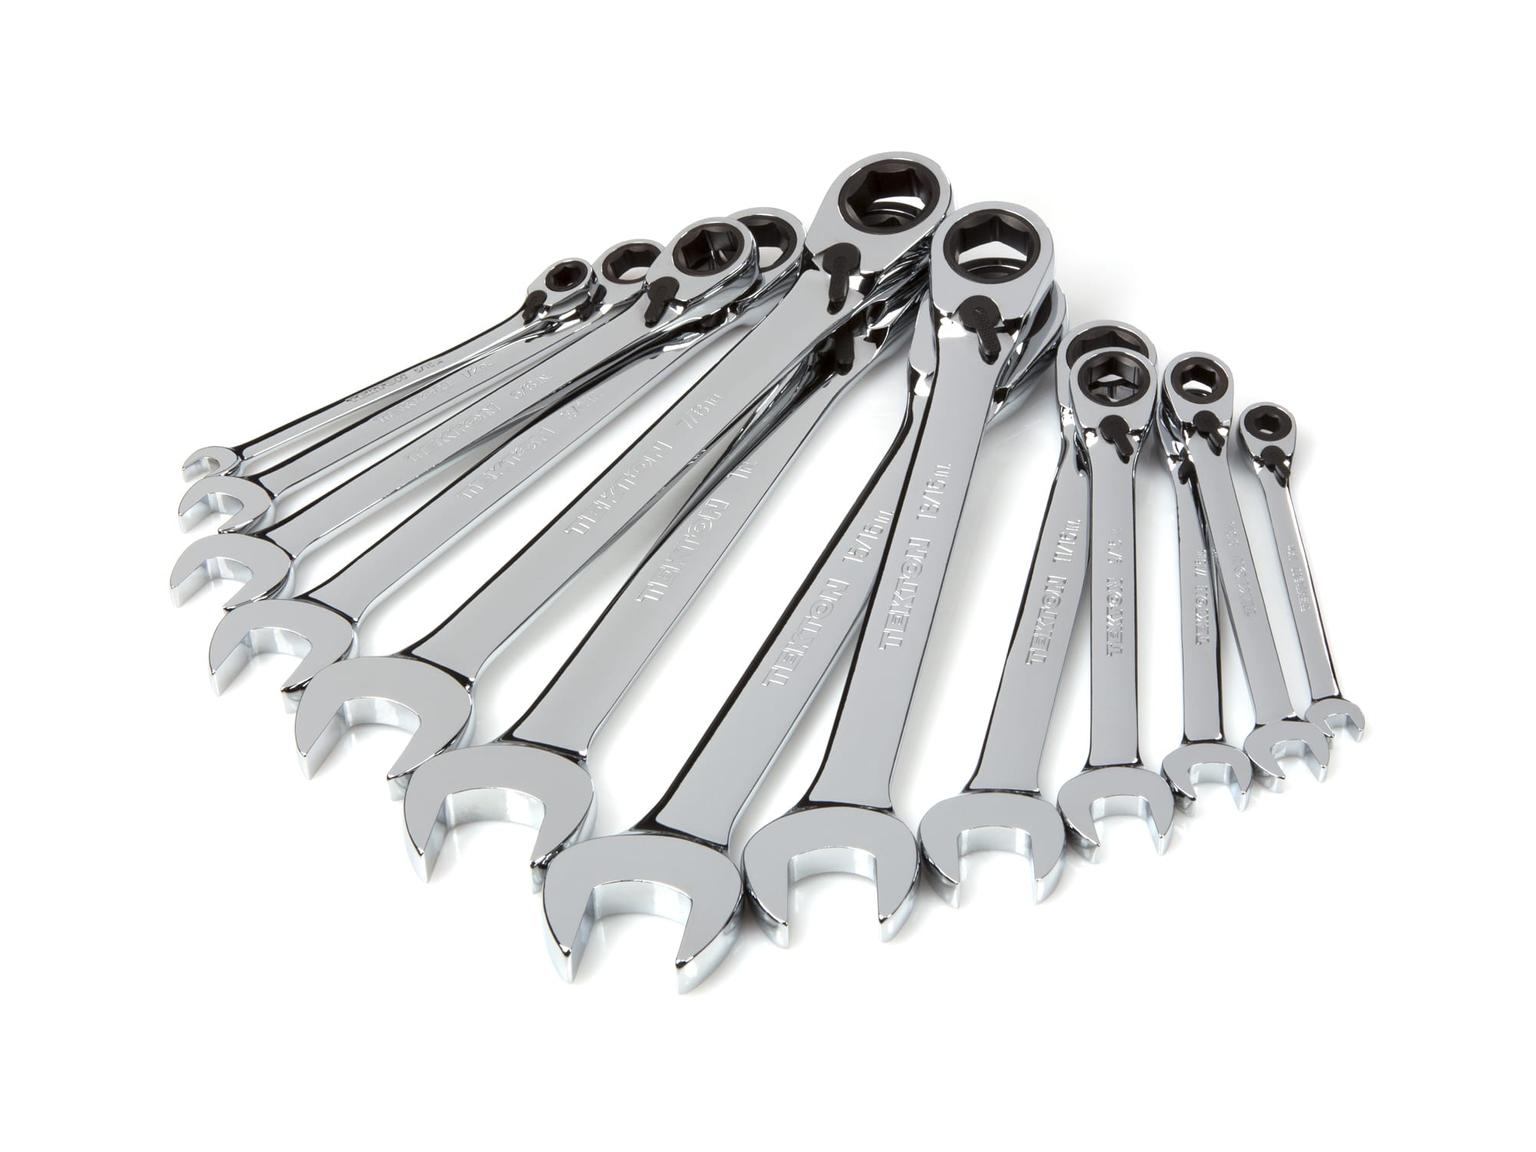 TEKTON WRN56071-D Reversible Ratcheting Combination Wrench Set, 13-Piece (1/4-1 in.) with Holder